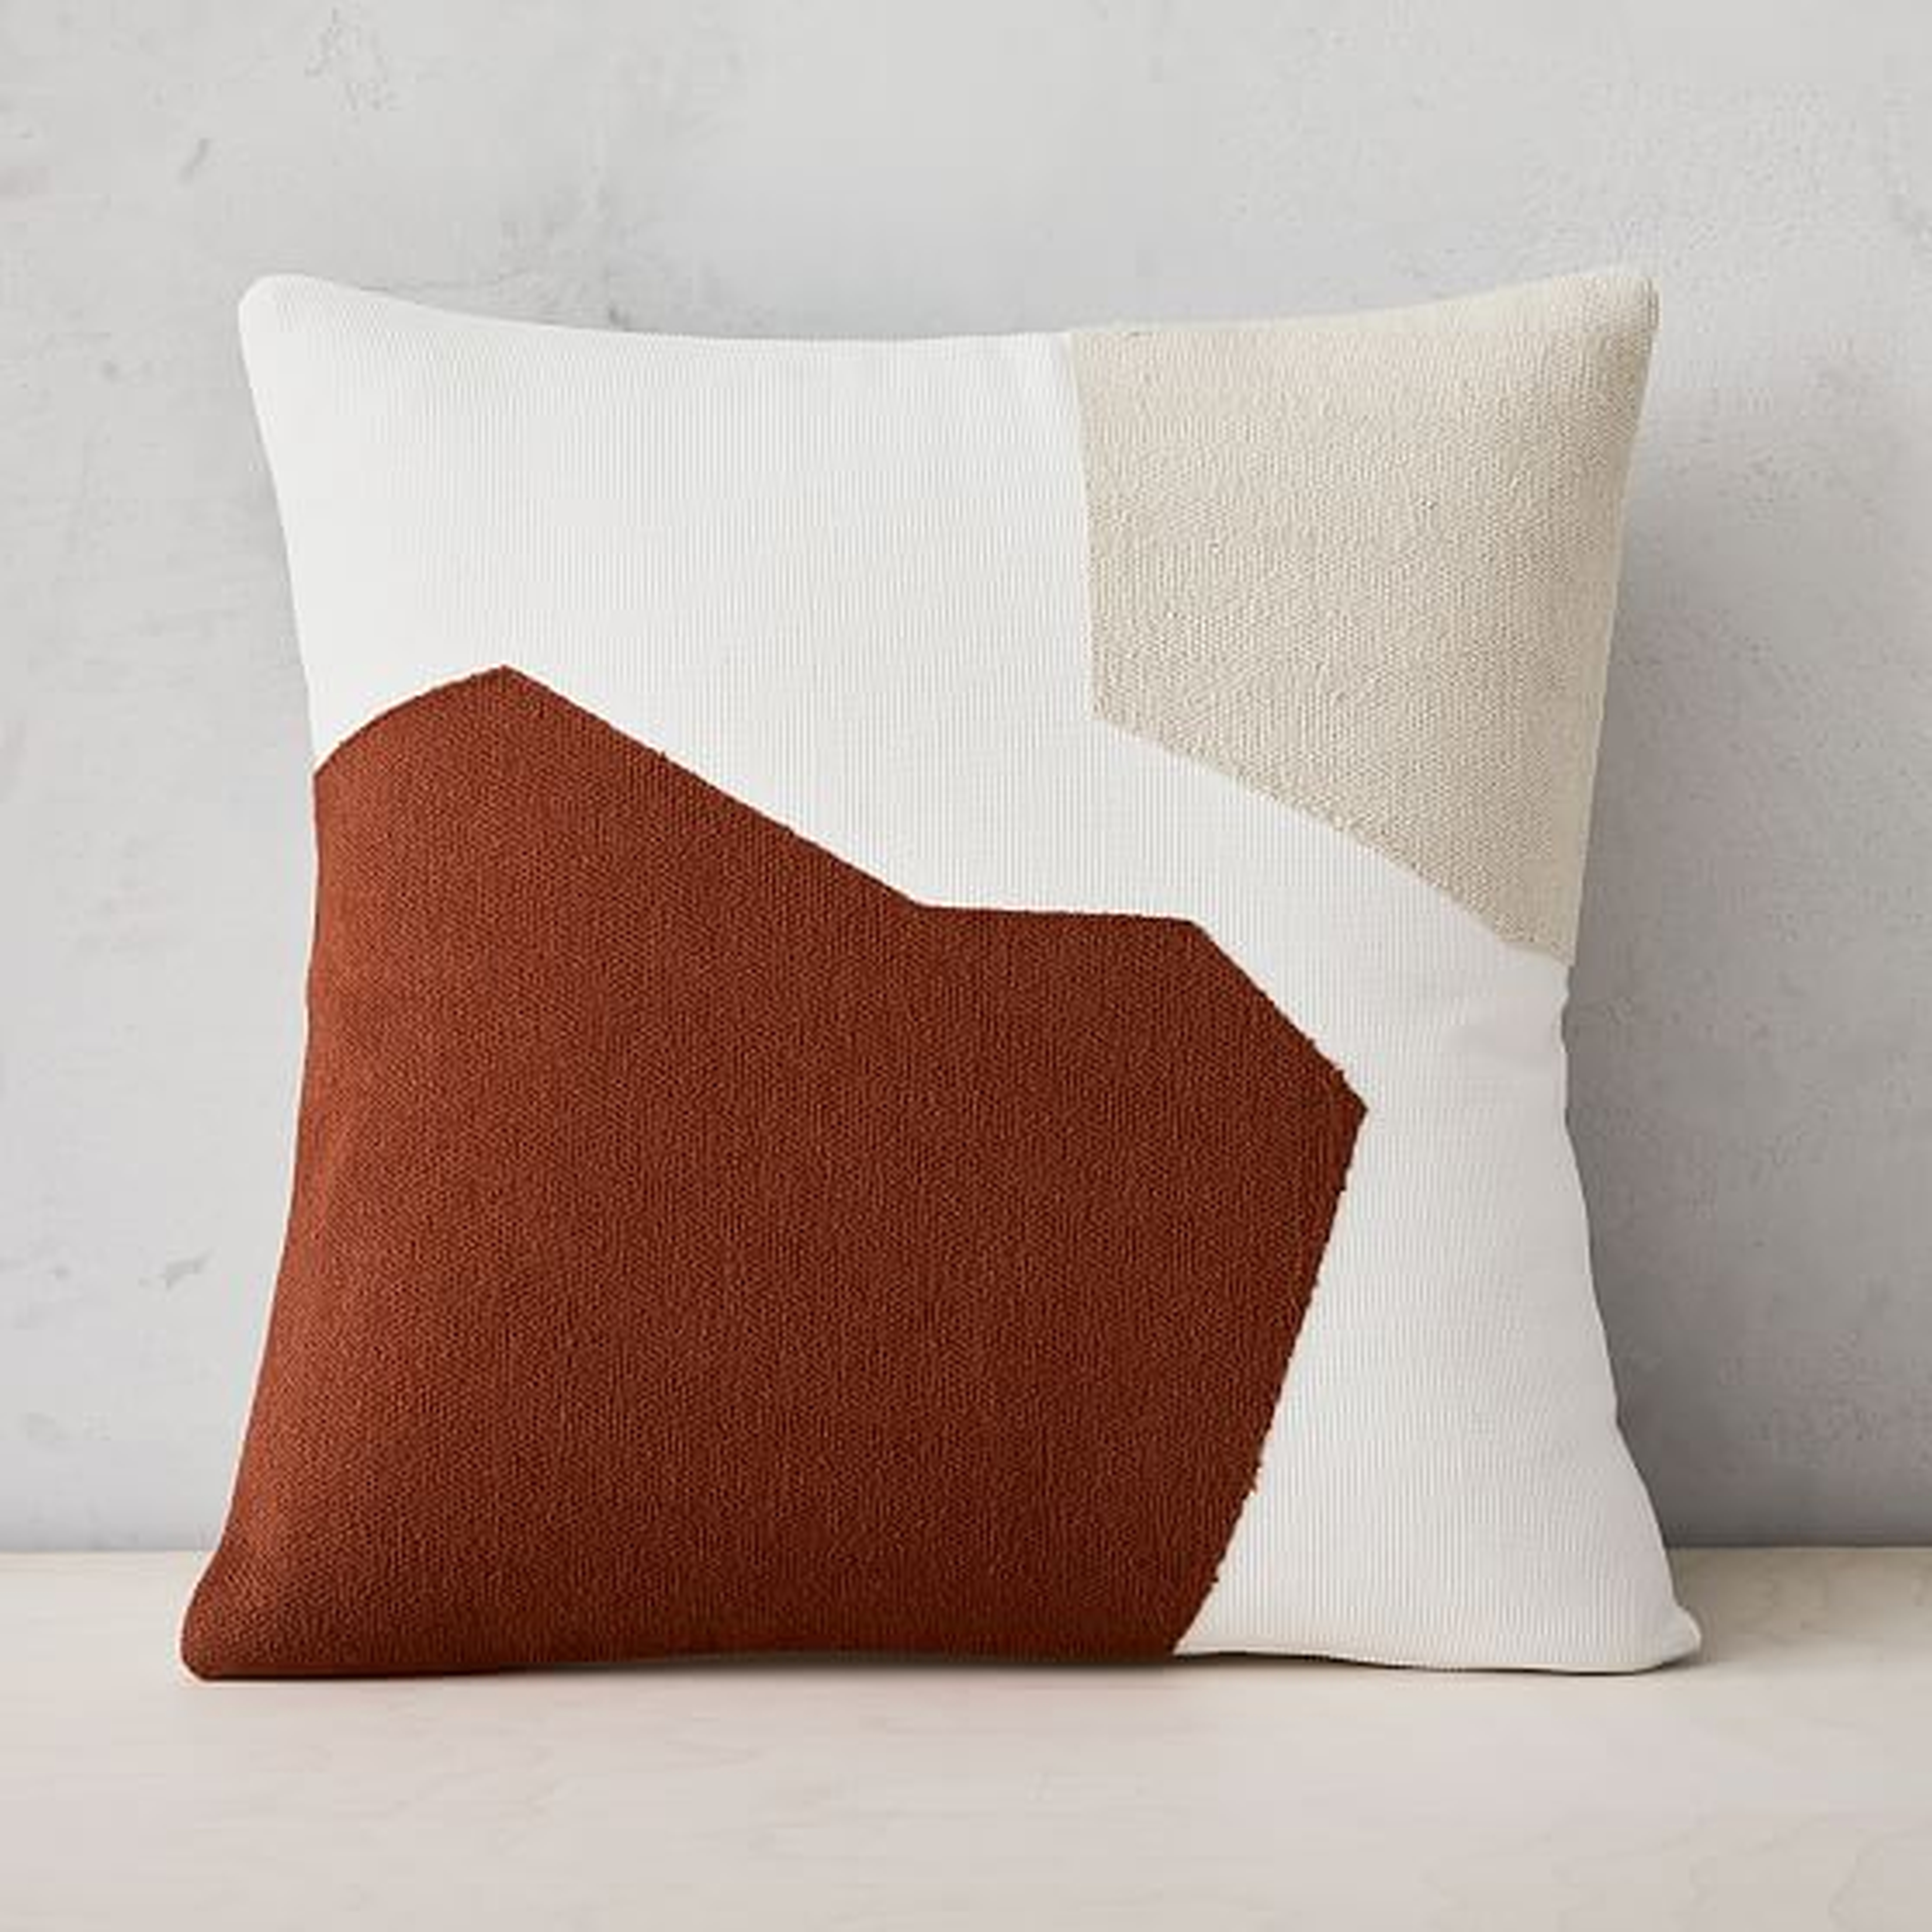 Corded Minimalist Geo Pillow Cover, Set of 2, Copper, 20"x20" - West Elm